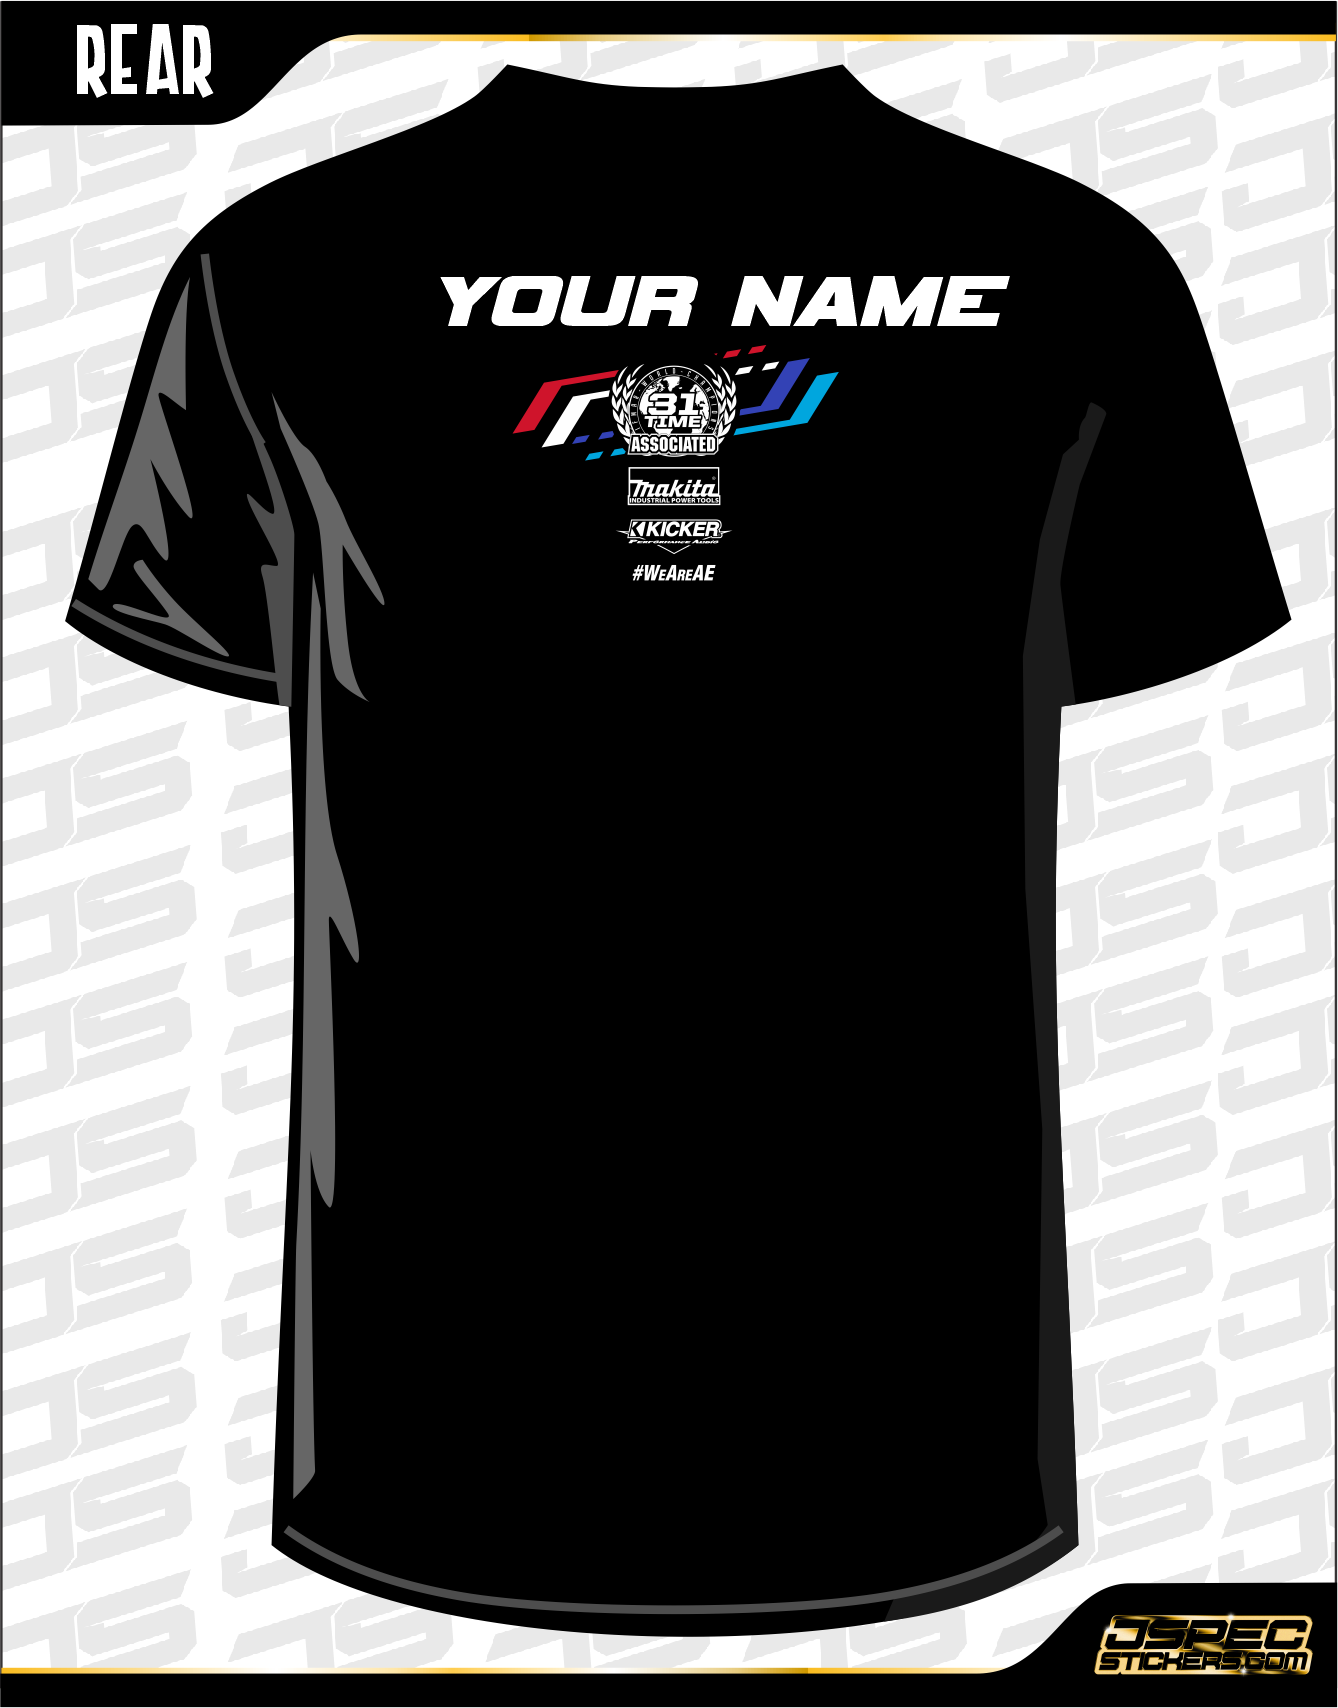 TEAM ASSOCIATED FT 2024 SHIRT with Sponsors